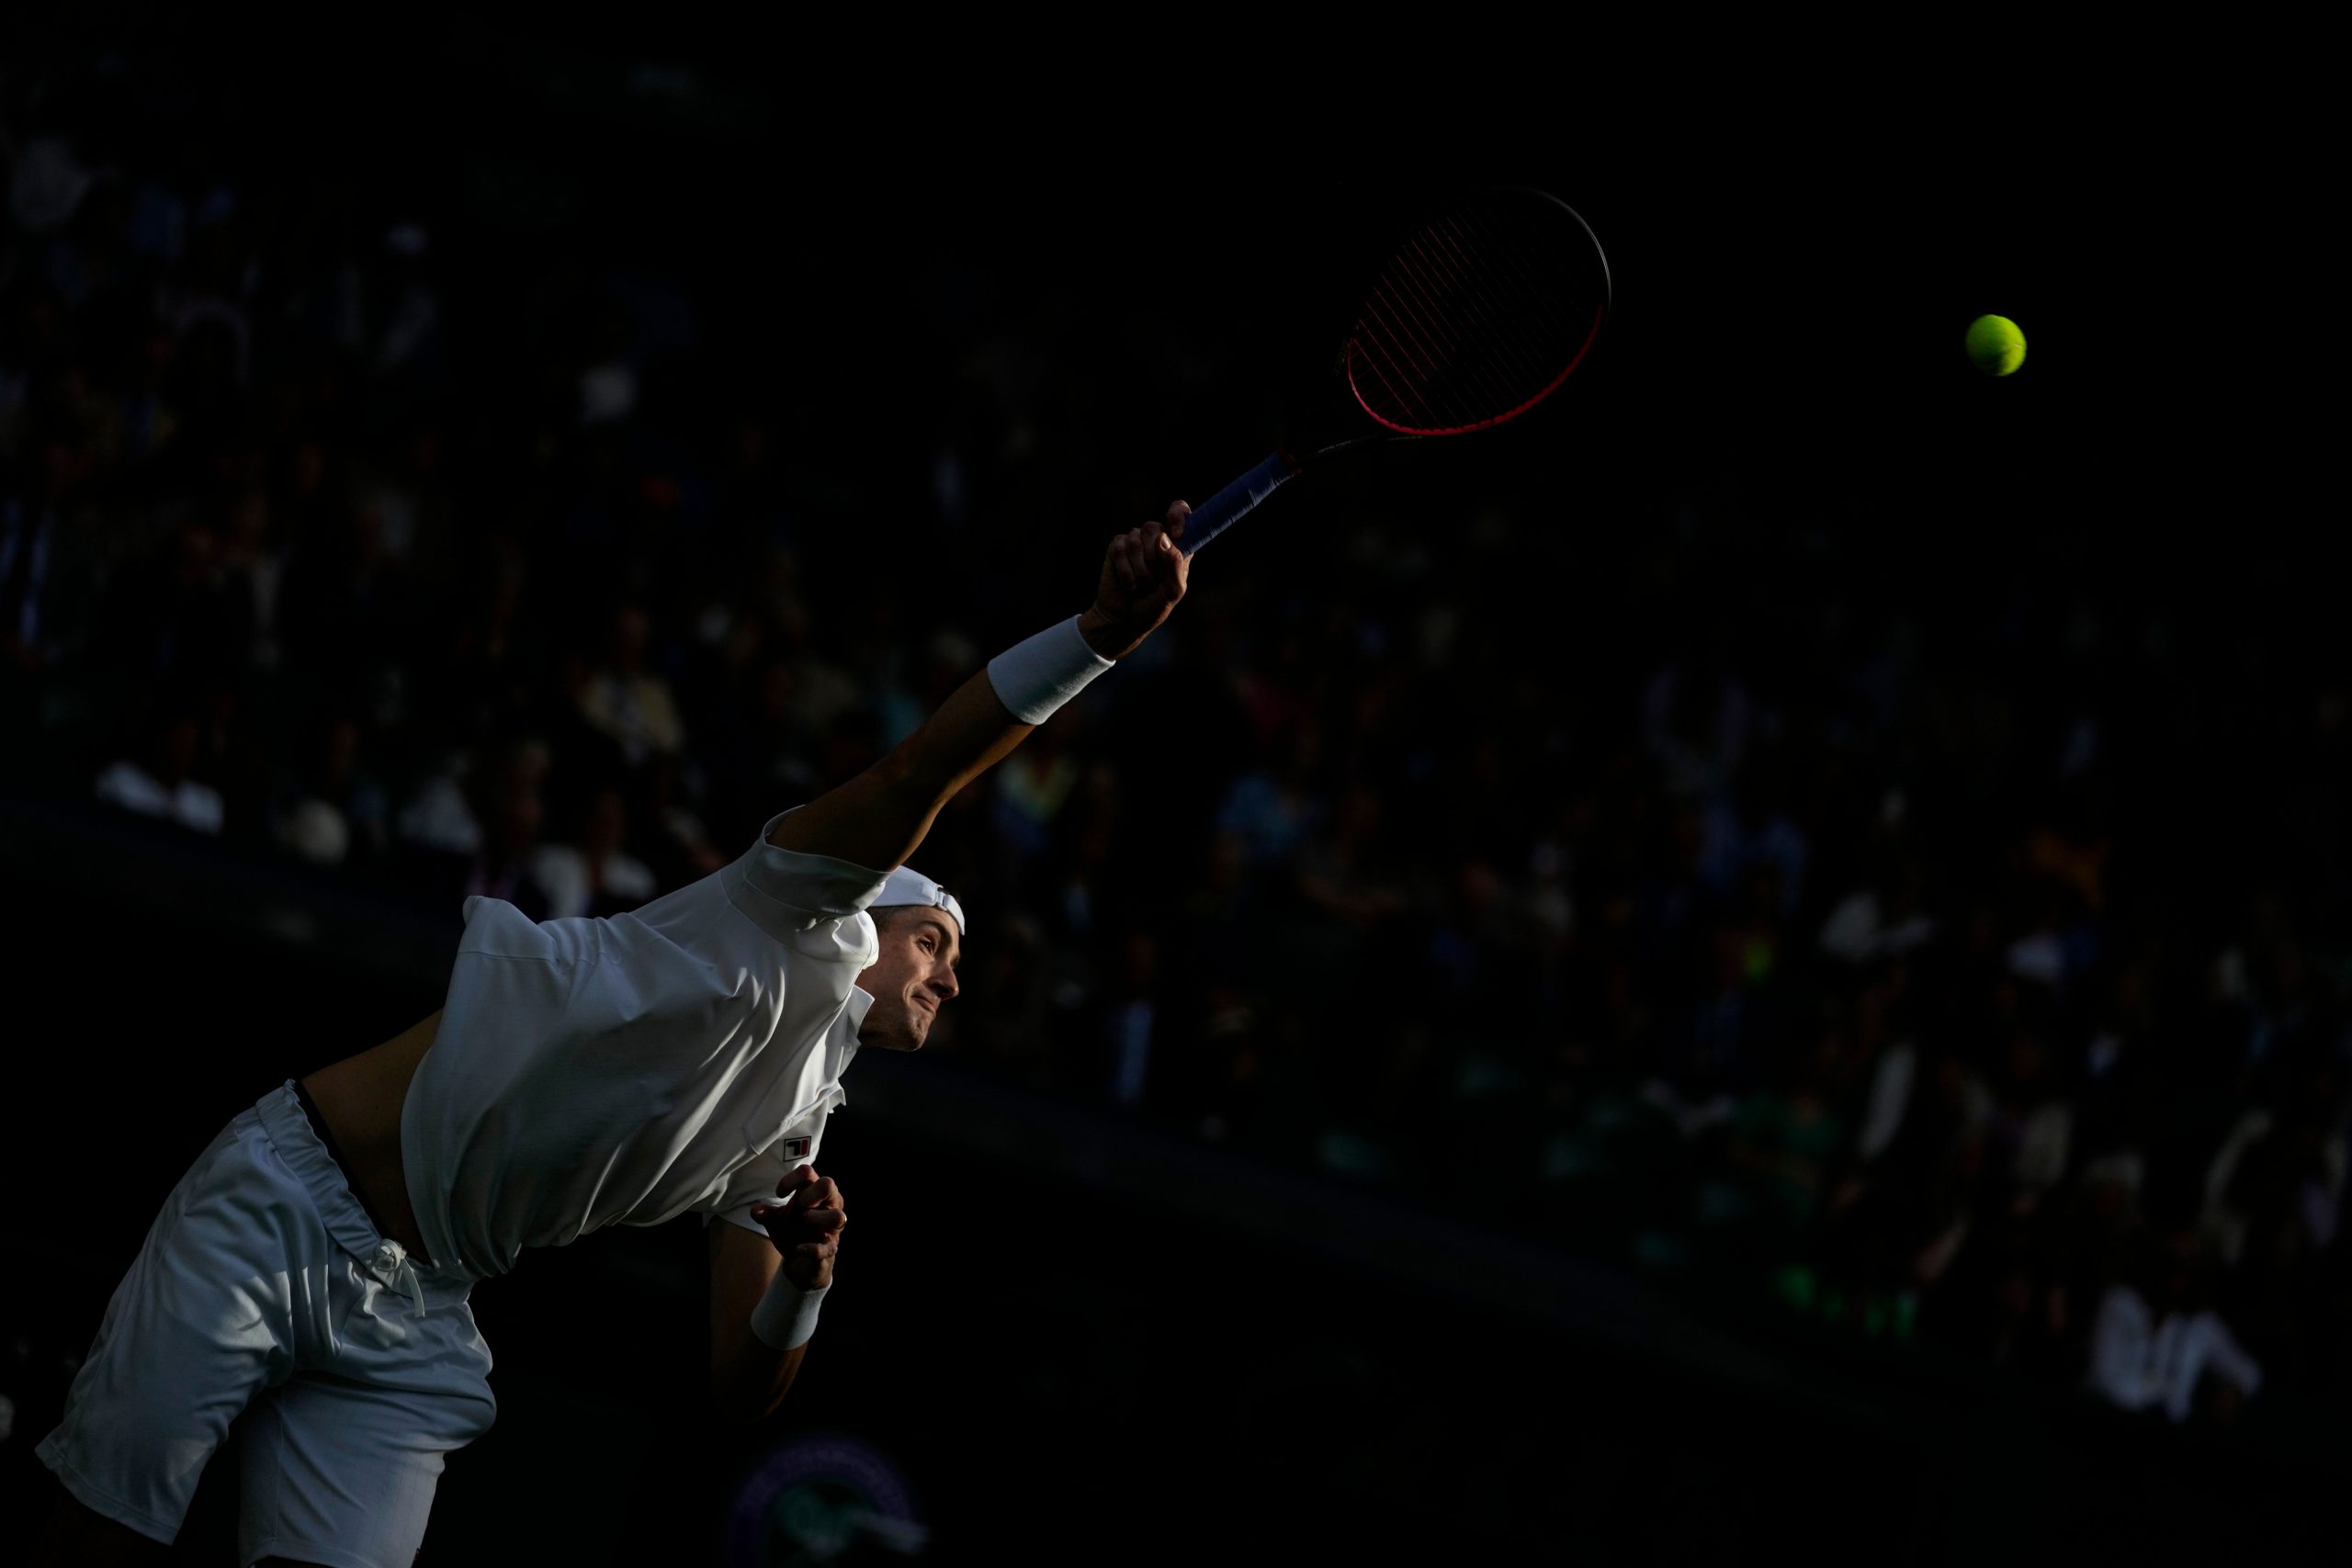 Wimbledon 2022: John Isner bags the record for most aces served